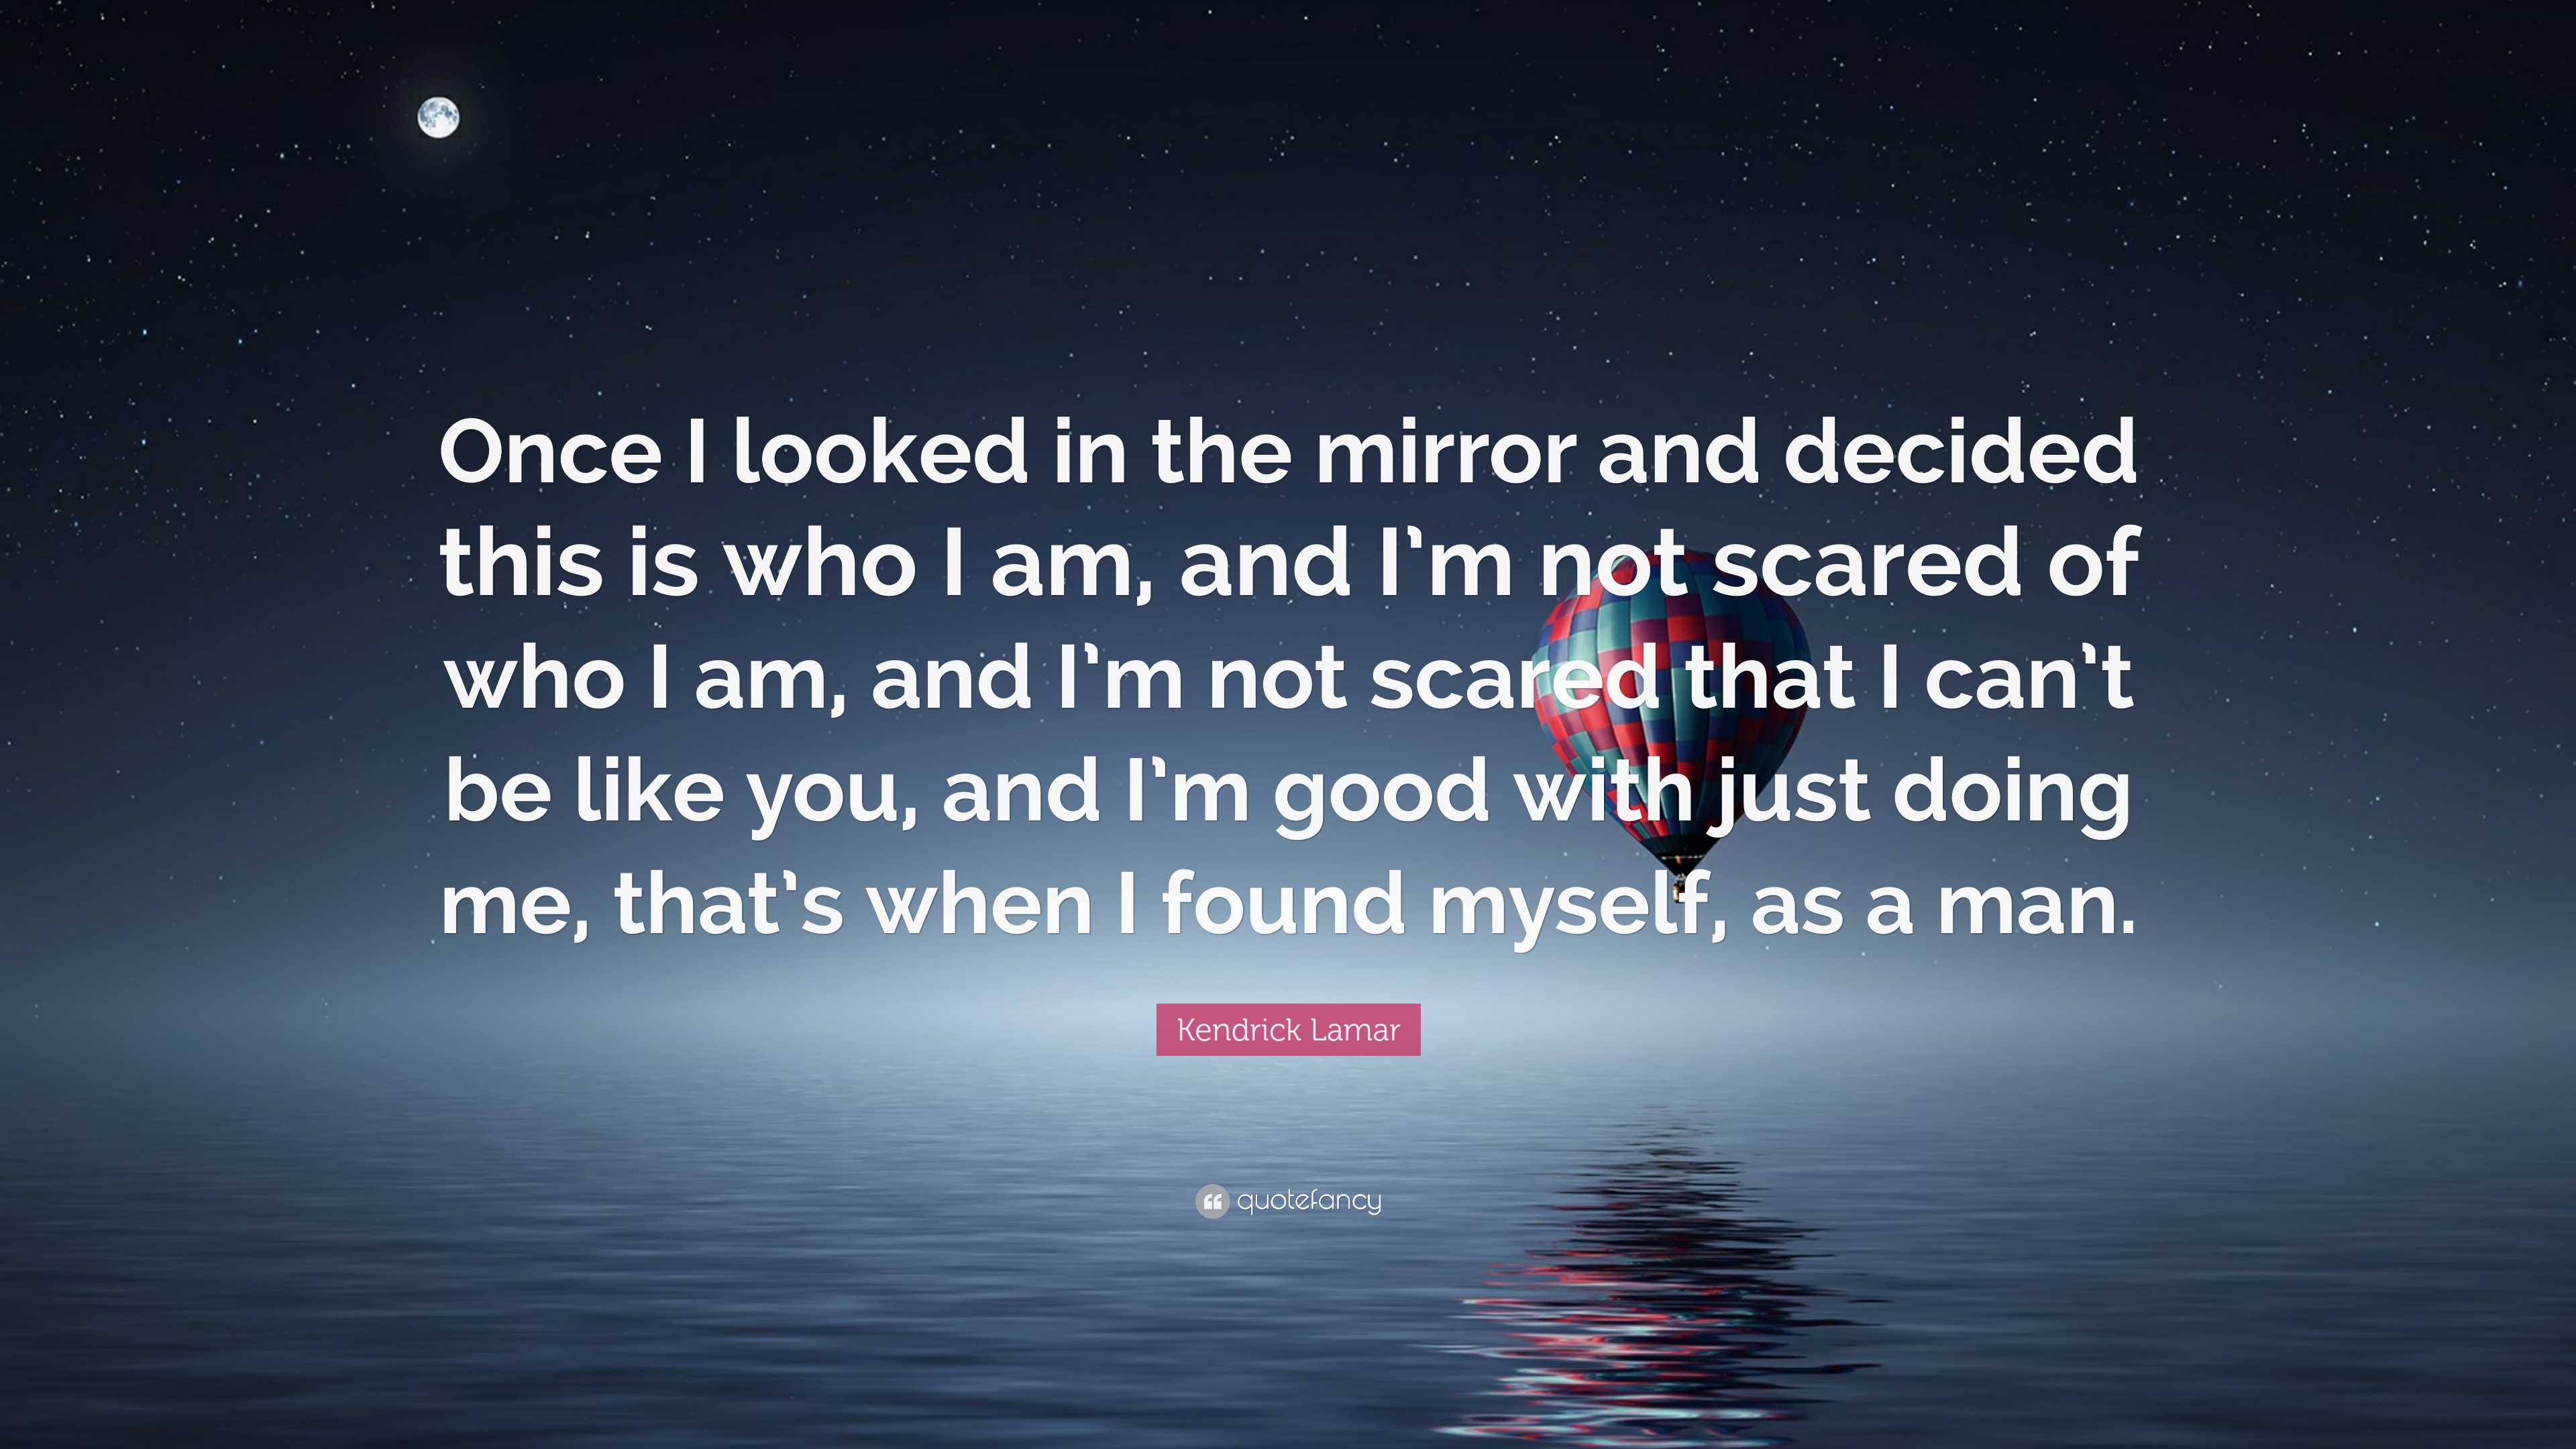 Kendrick Lamar Quote: “Once I looked in the mirror and decided